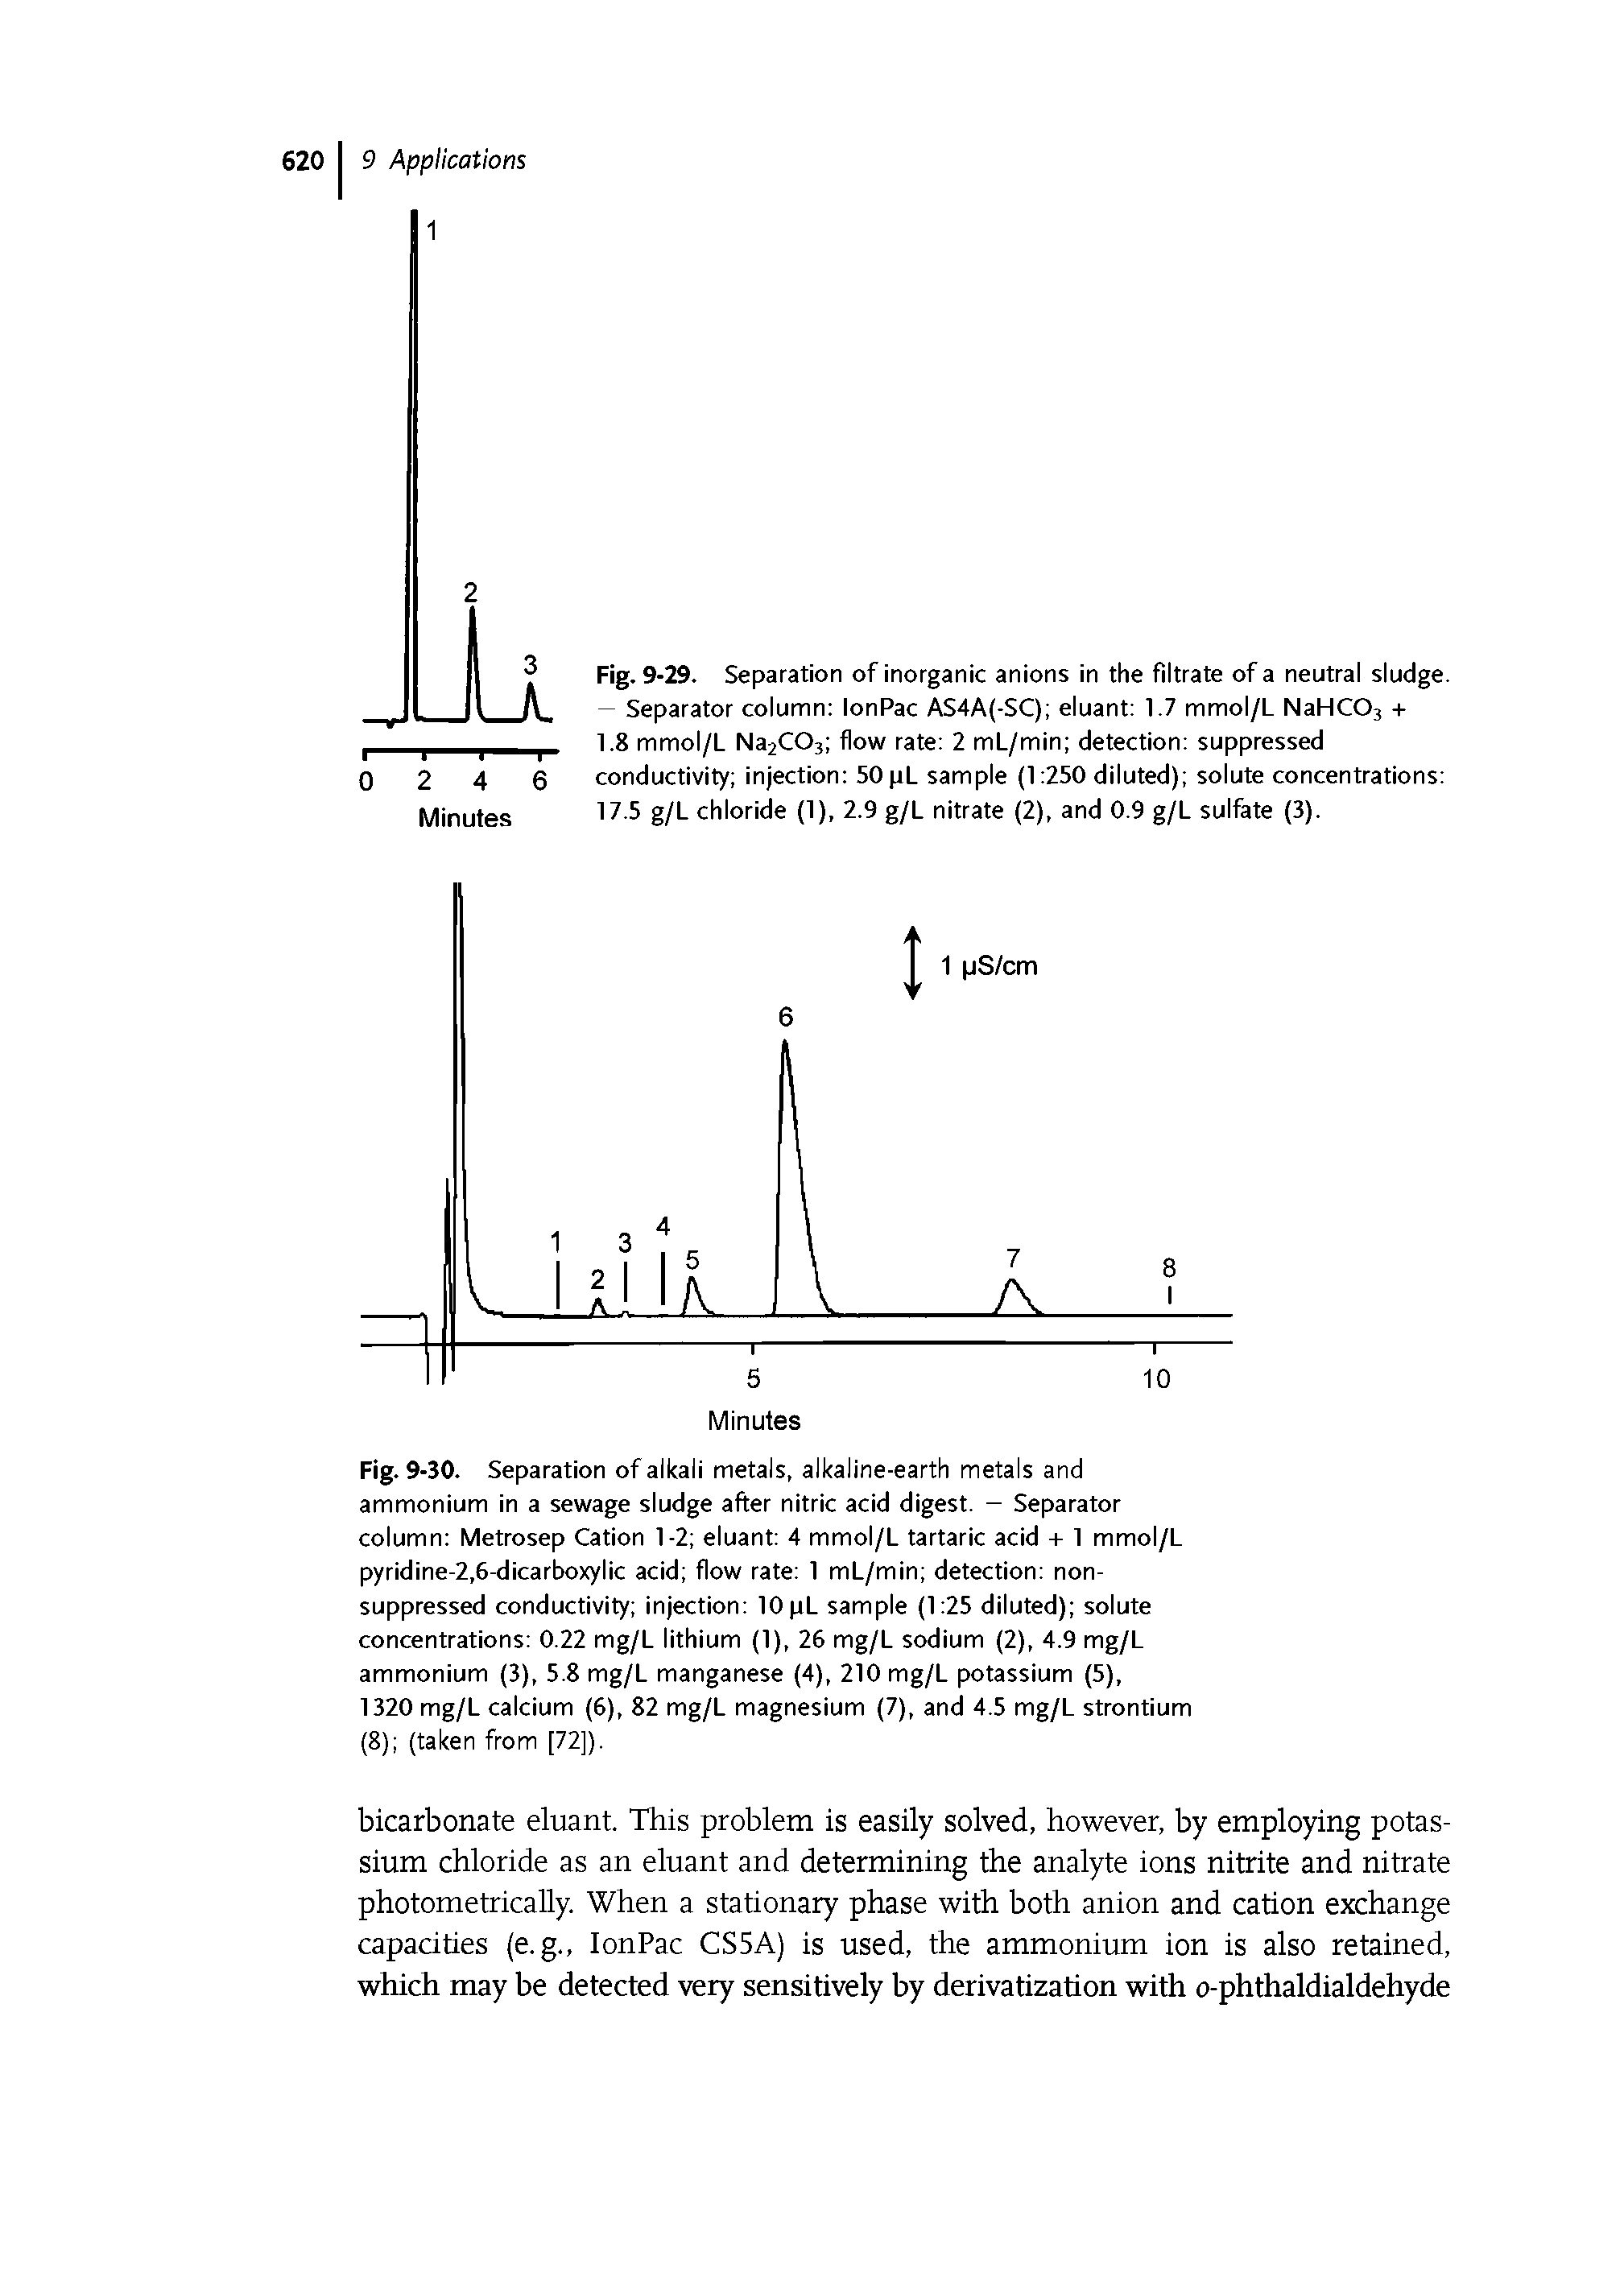 Fig. 9-30. Separation of alkali metals, alkaline-earth metals and ammonium in a sewage sludge after nitric acid digest. - Separator column Metrosep Cation 1-2 eluant 4 mmol/L tartaric acid + 1 mmol/L pyridine-2,6-dicarboxylic acid flow rate 1 mL/min detection non-suppressed conductivity injection 10pL sample (1 25 diluted) solute concentrations 0.22 mg/L lithium (1), 26 mg/L sodium (2), 4.9 mg/L ammonium (3), 5.8 mg/L manganese (4), 210 mg/L potassium (5).